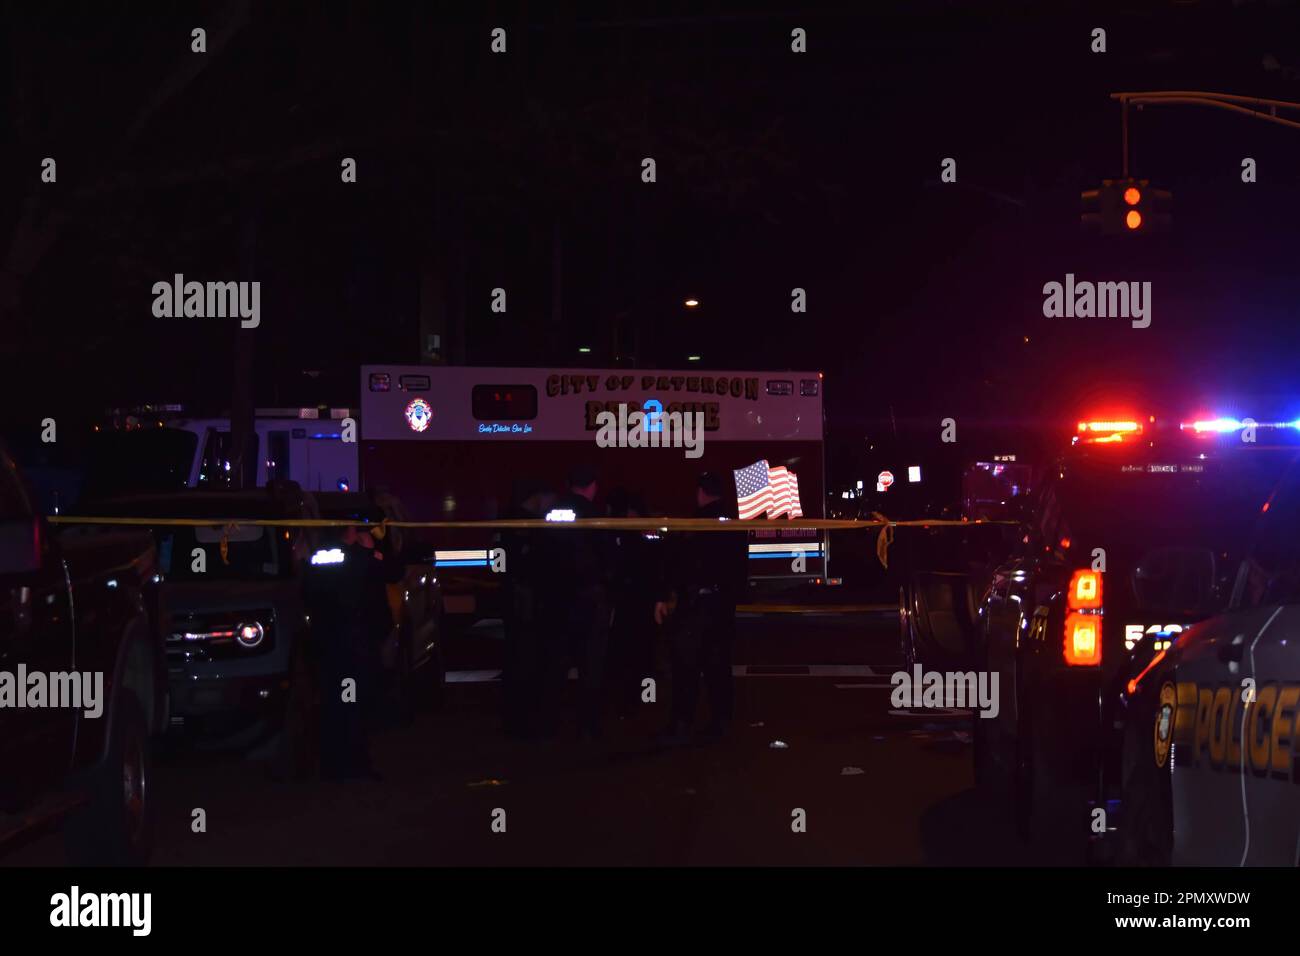 Police officers gather in the area of East 22nd Street. Four people reported shot in a shooting in Paterson, New Jersey, United States in the early morning hours of Saturday, April 15, 2023. Reportedly, four people were shot early Saturday morning after 12:00 AM in Paterson, some of the victims were transported by EMS and some victims were transported by private vehicles. No further information was immediately available from the Paterson police department. There are several crime scenes. One crime scene in the area of East 22nd Street had a vehicle stopped with several investigators and police Stock Photo